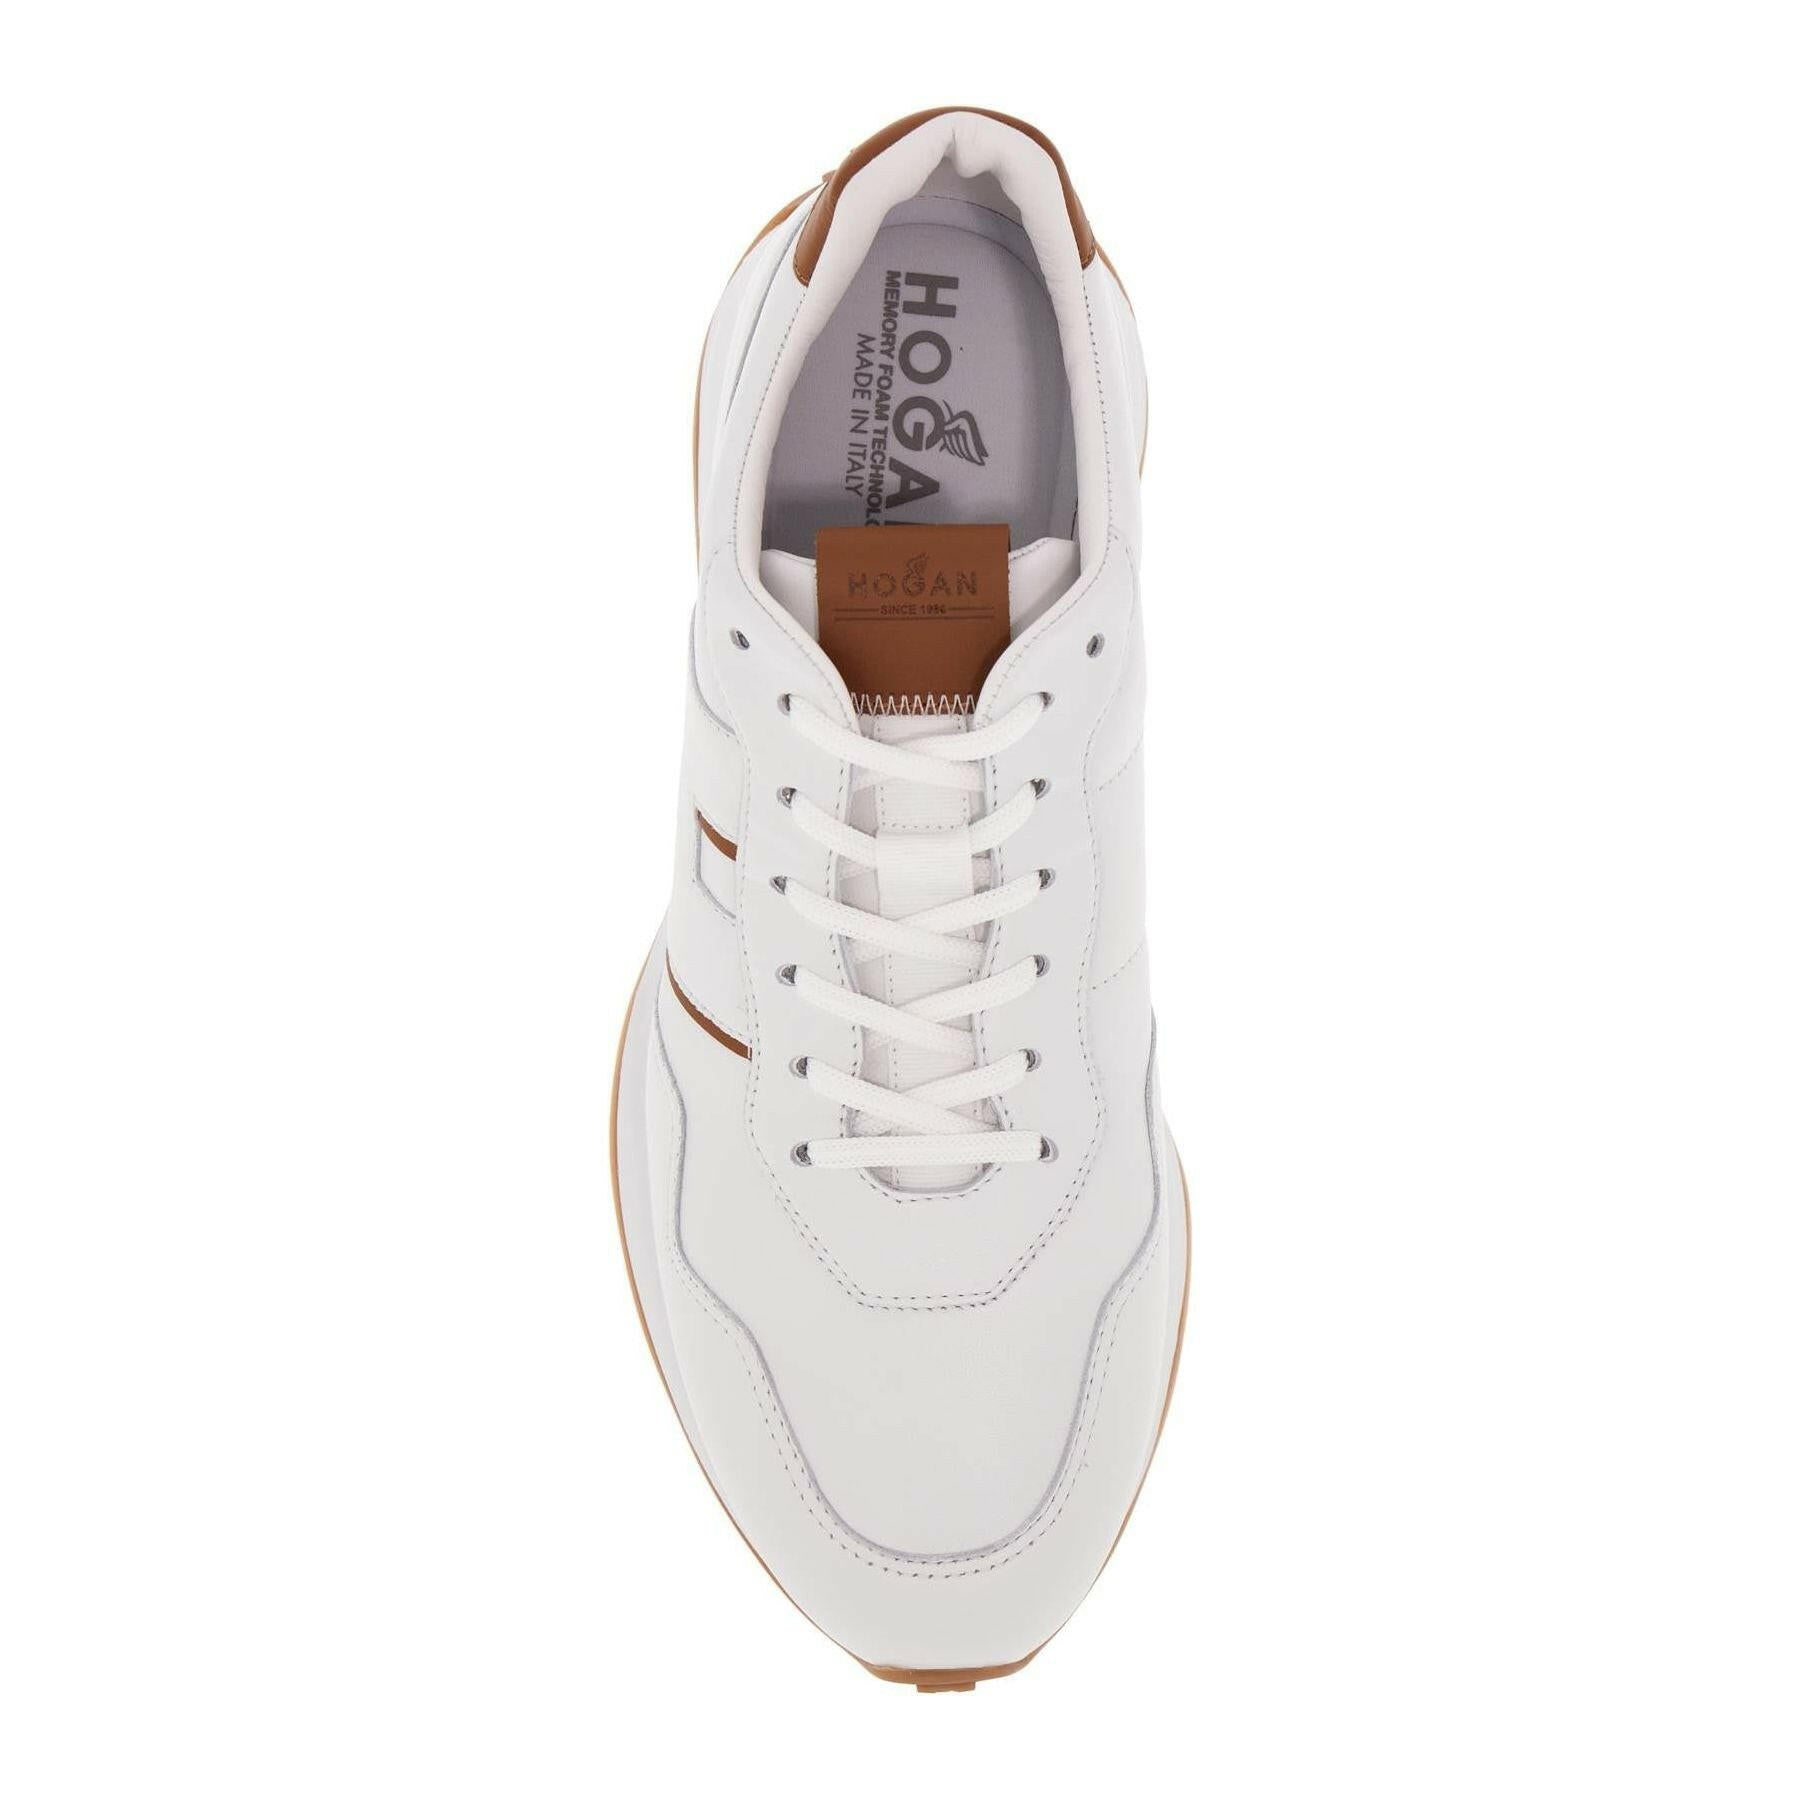 H601 Leather Sneakers.